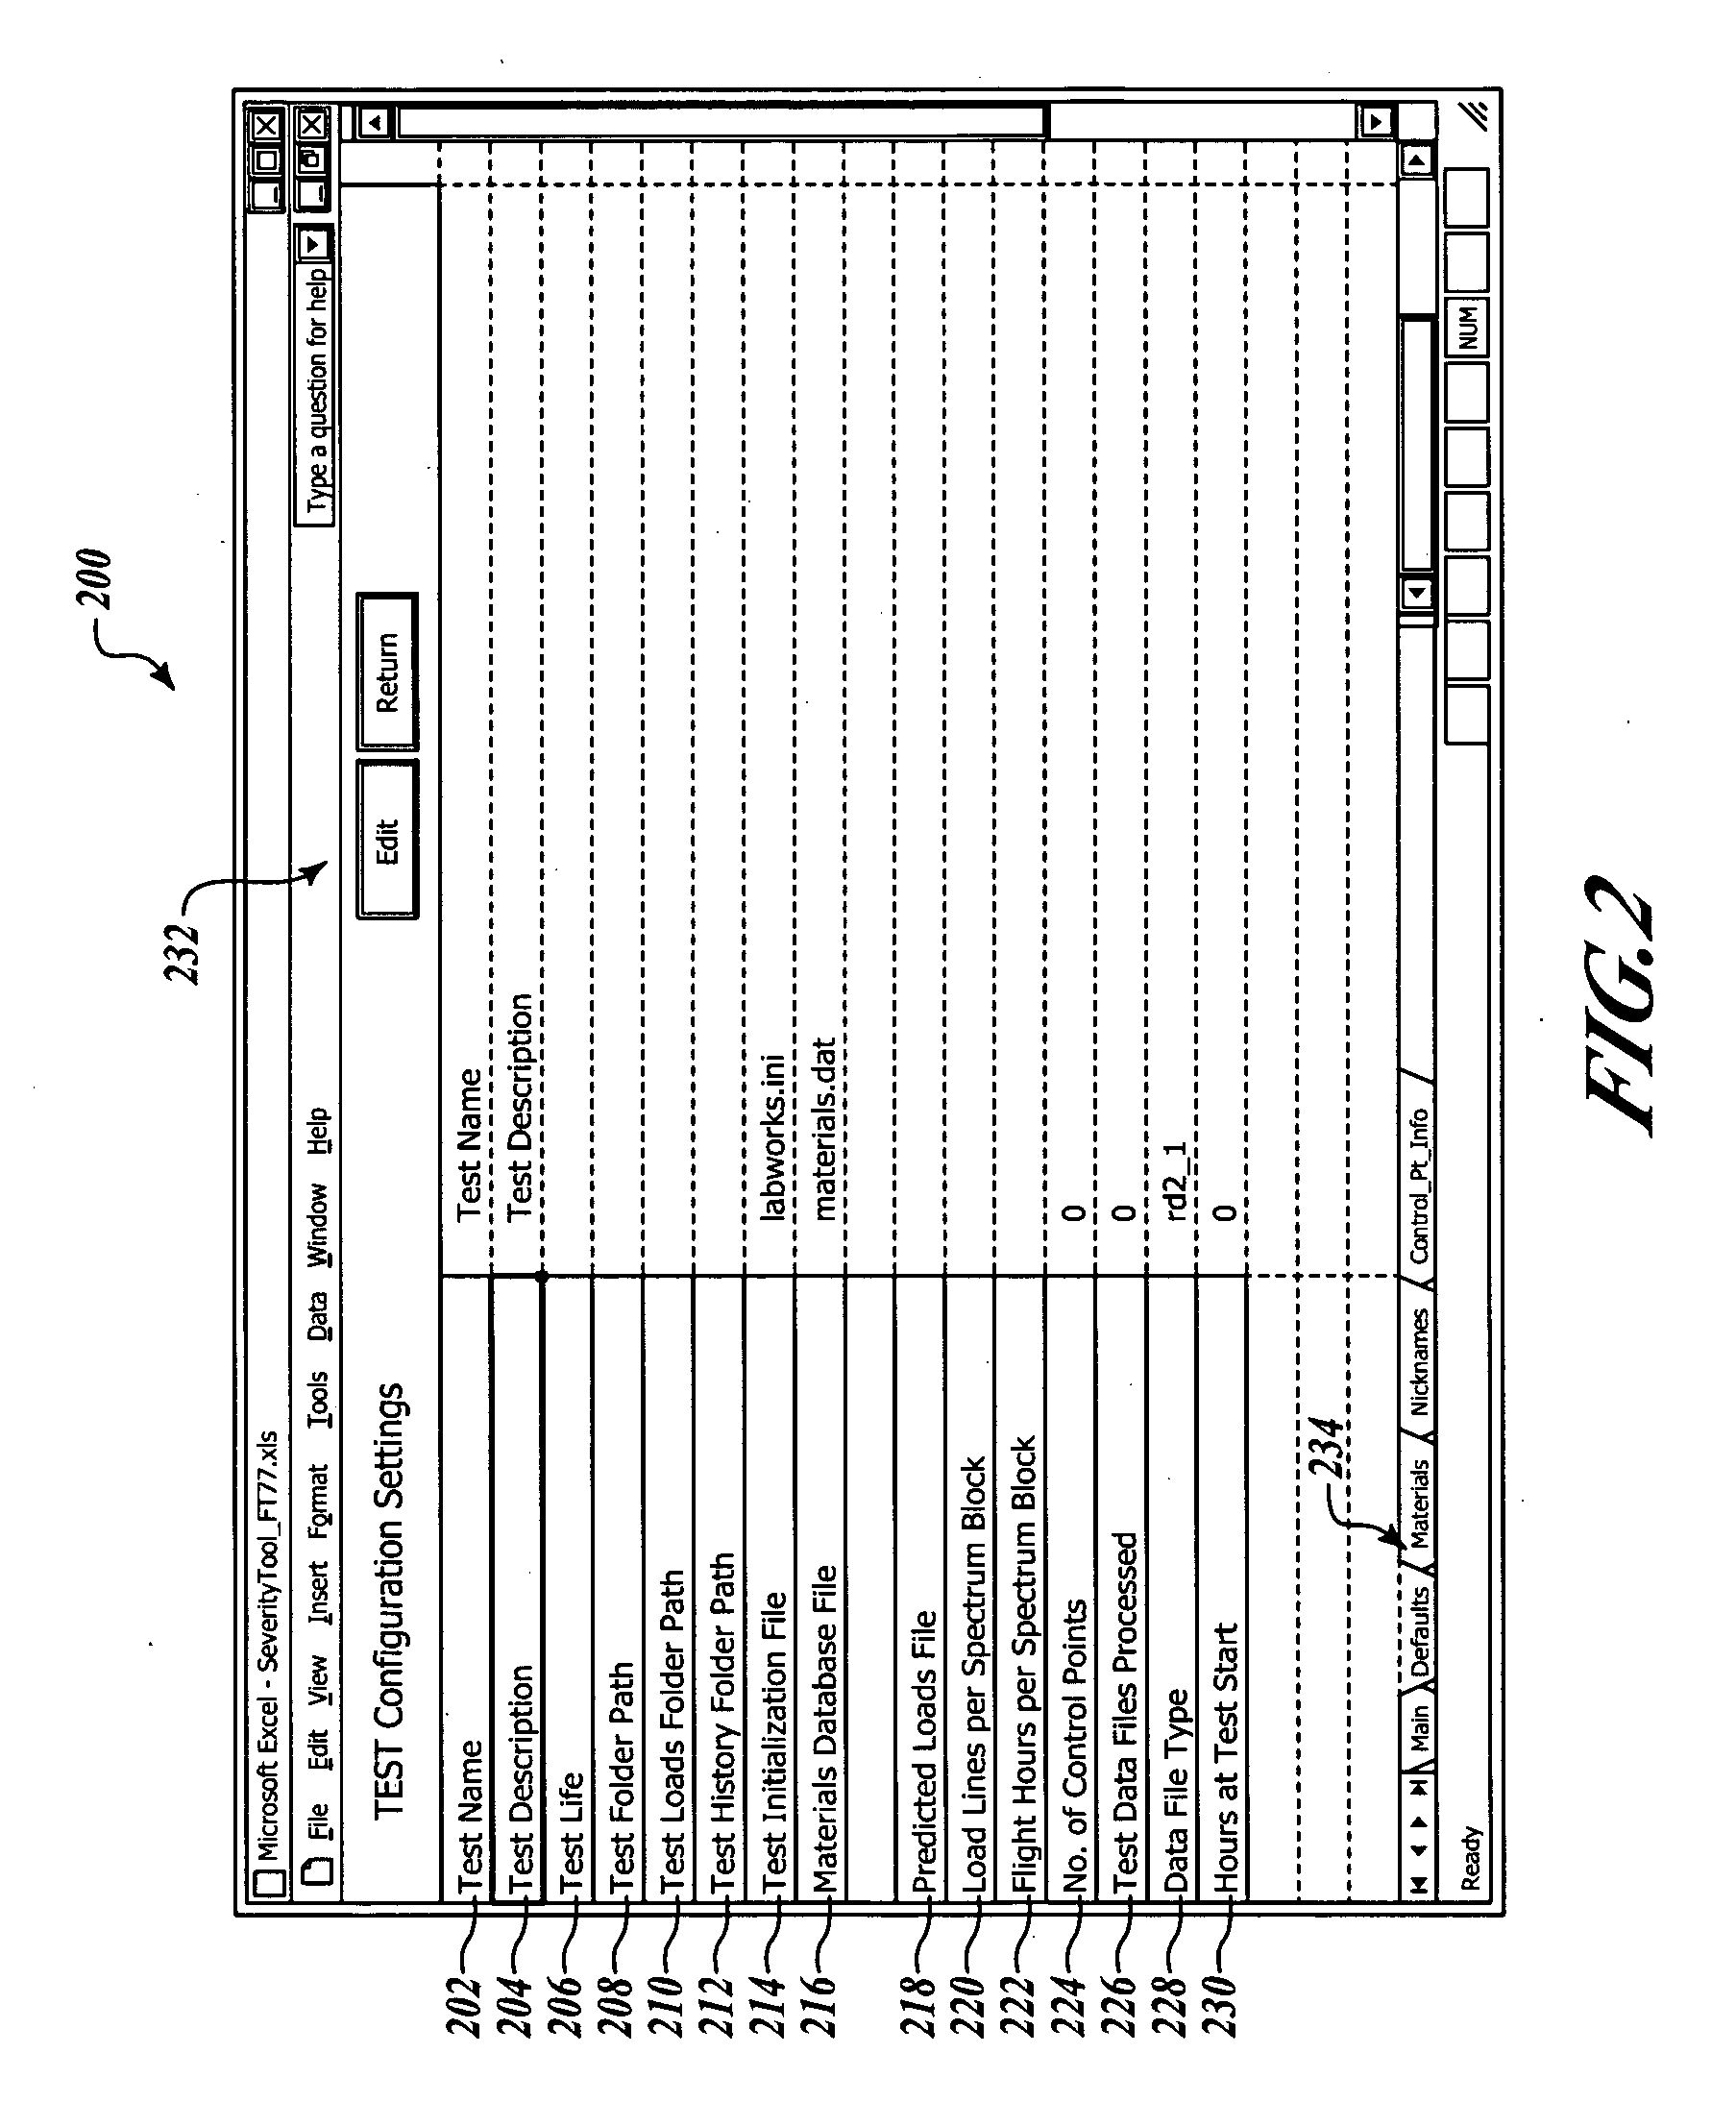 Methods and systems for analyzing structural test data